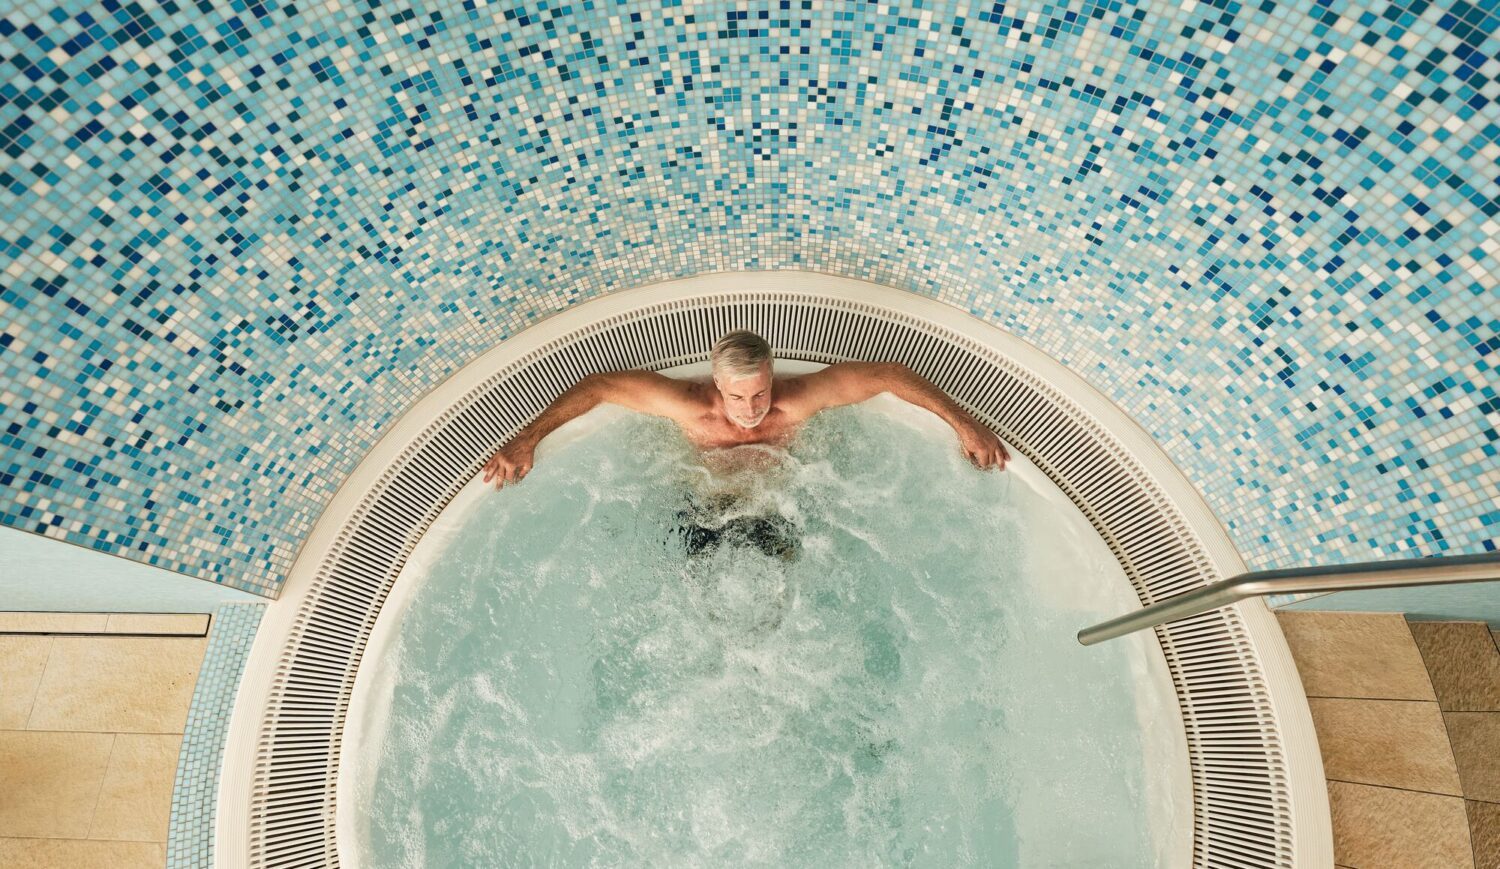 The whirlpool provides relaxing moments © Travelcharme - Arne Nagel